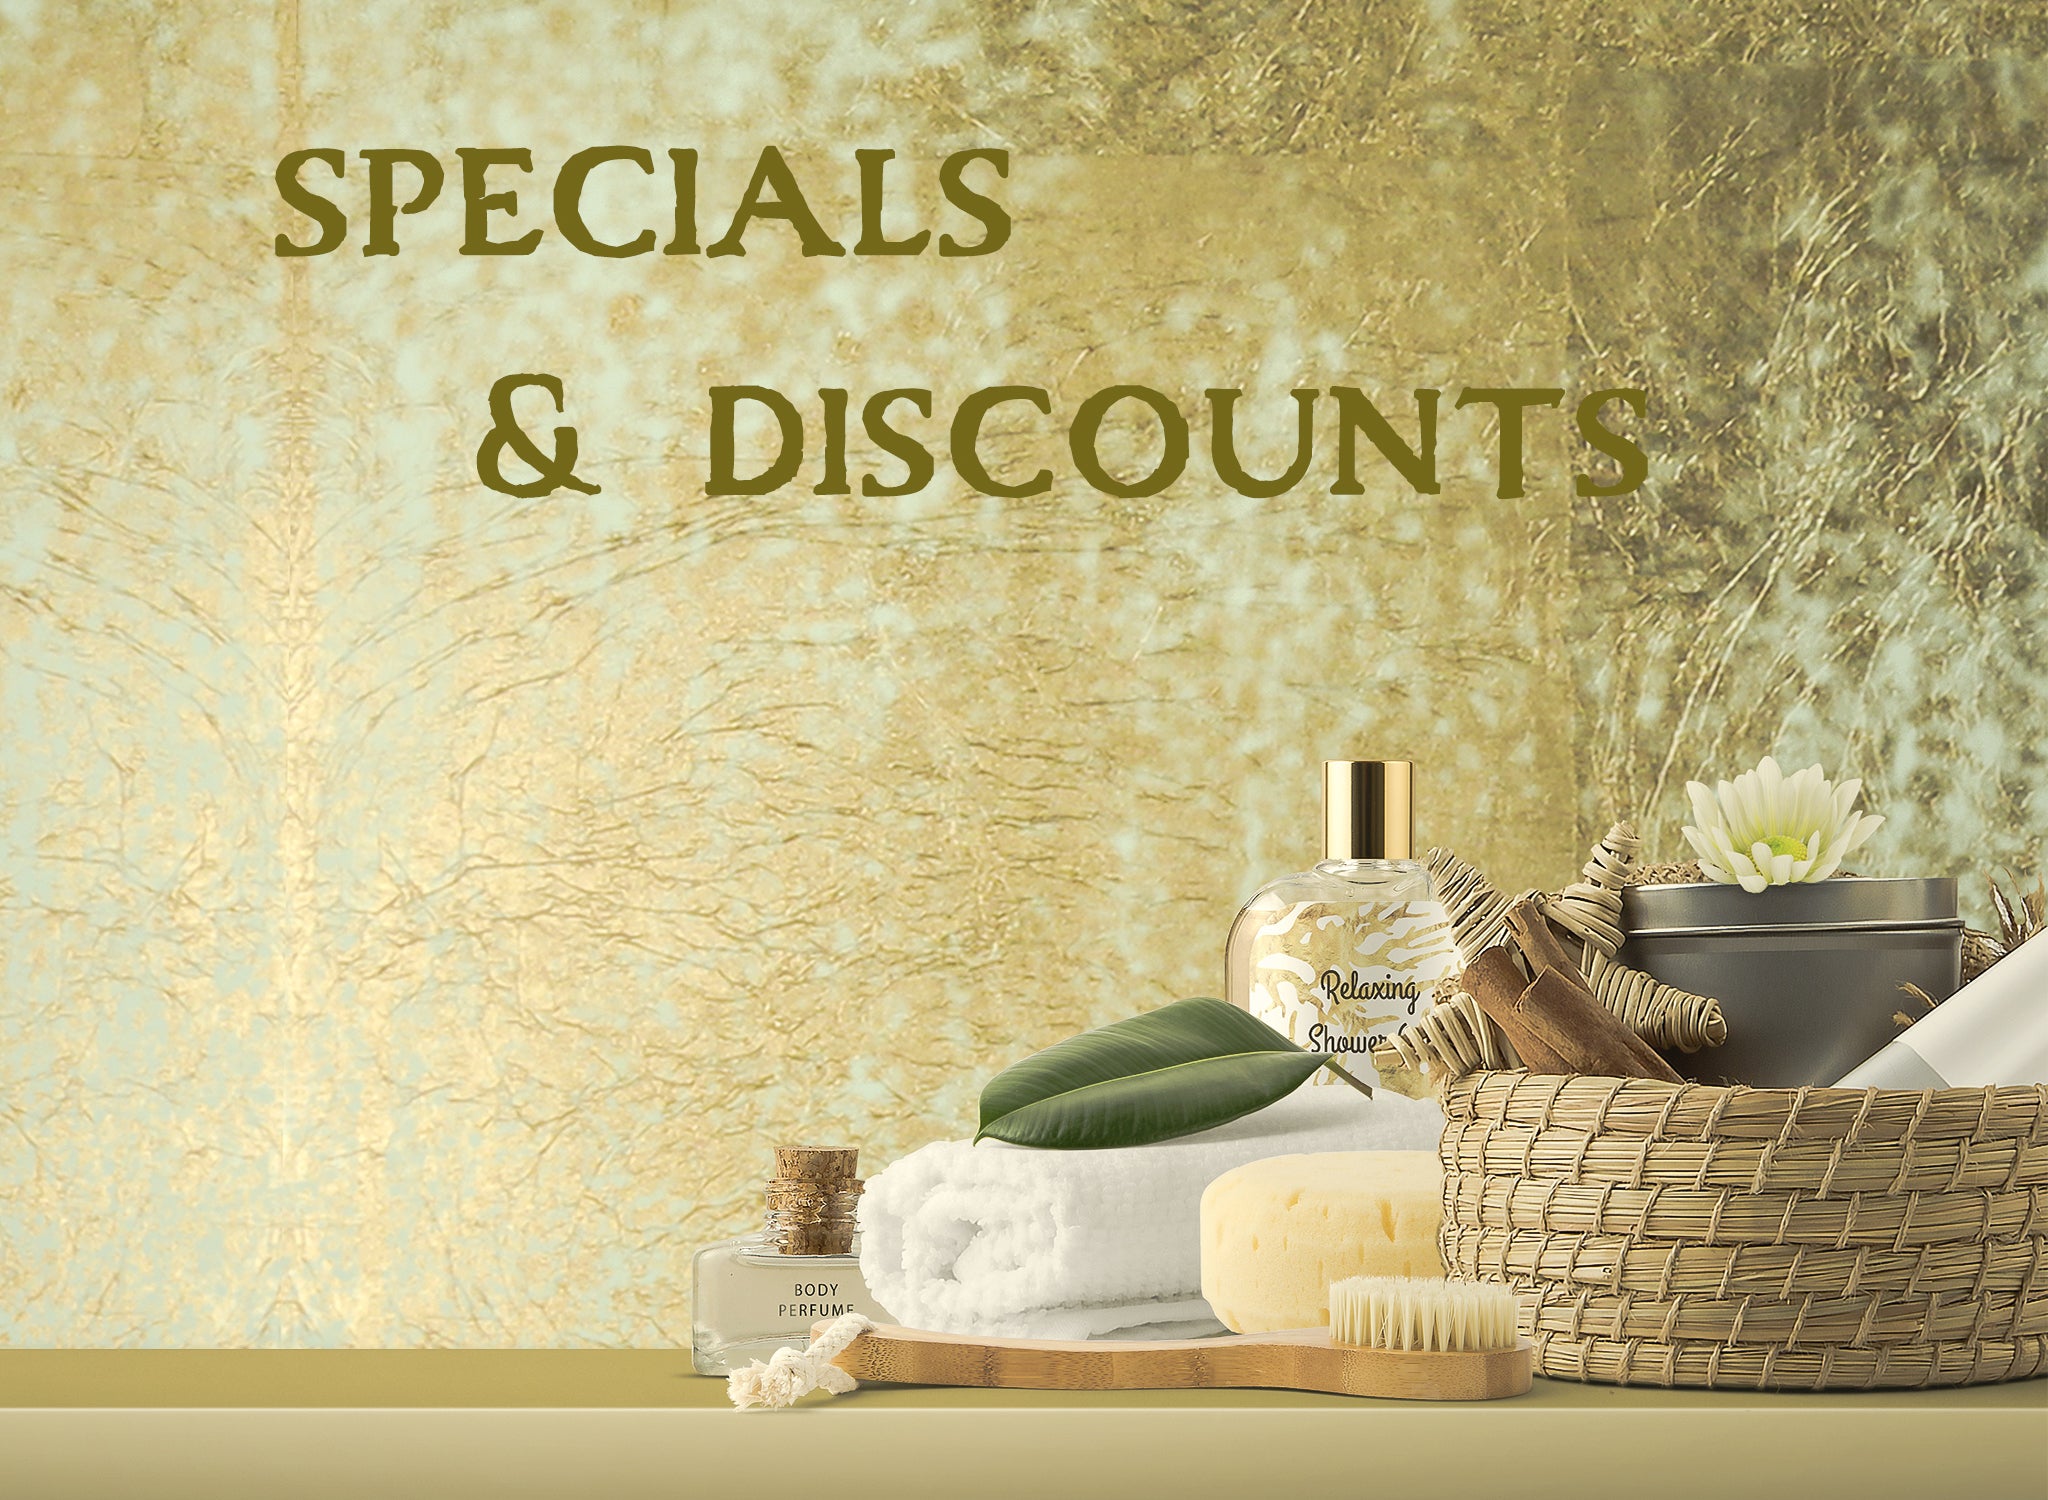 Discounted specialty items